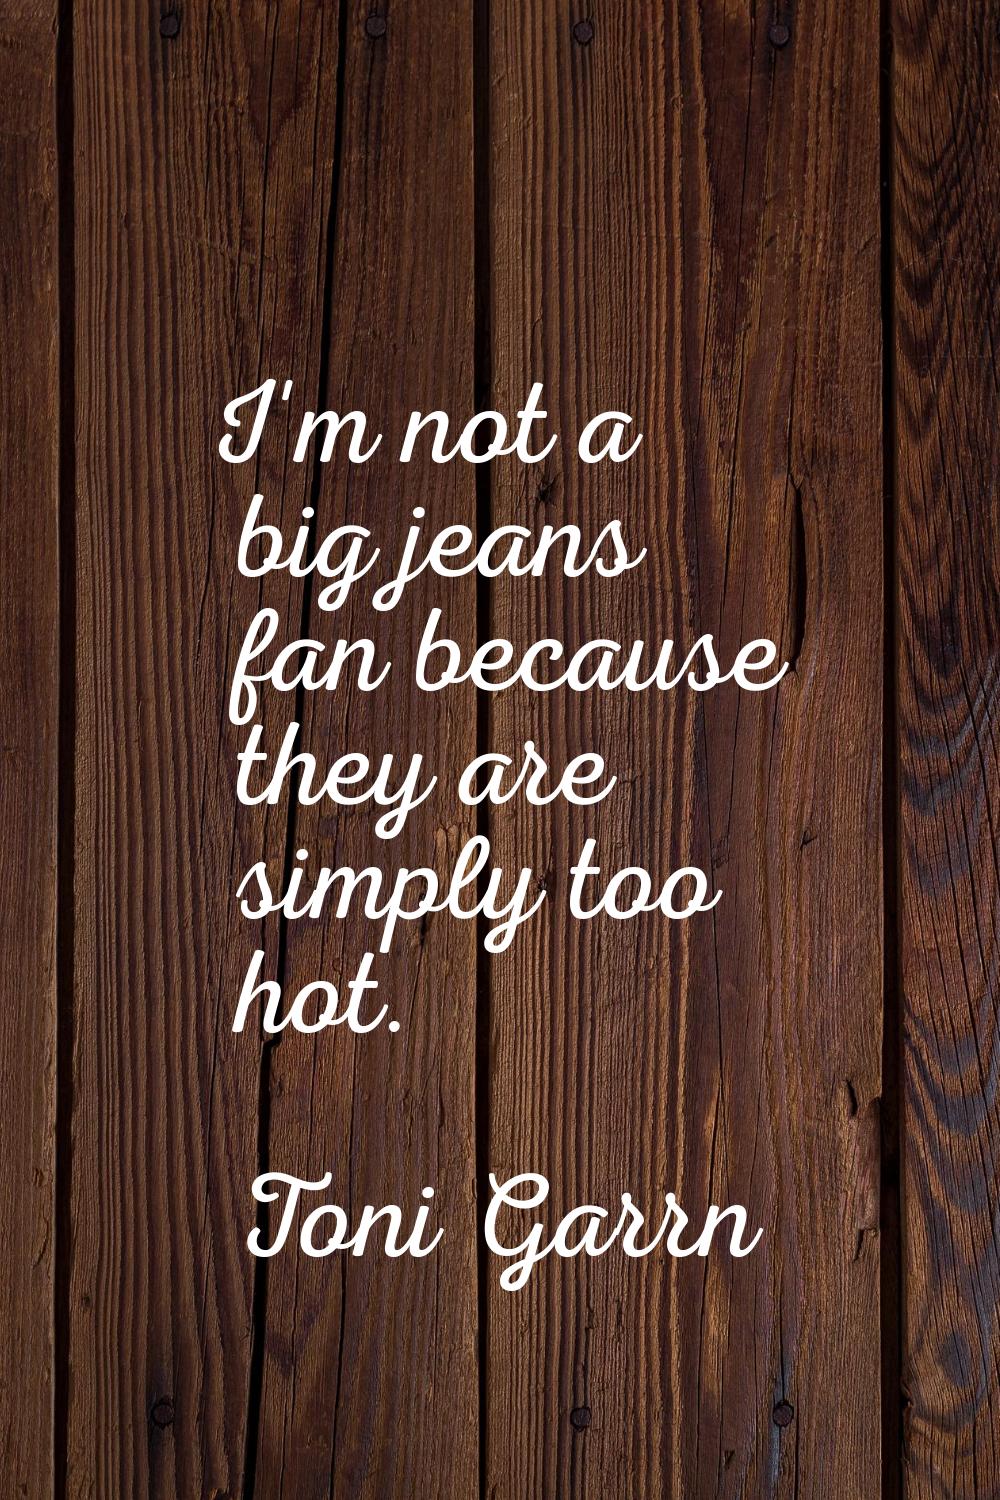 I'm not a big jeans fan because they are simply too hot.